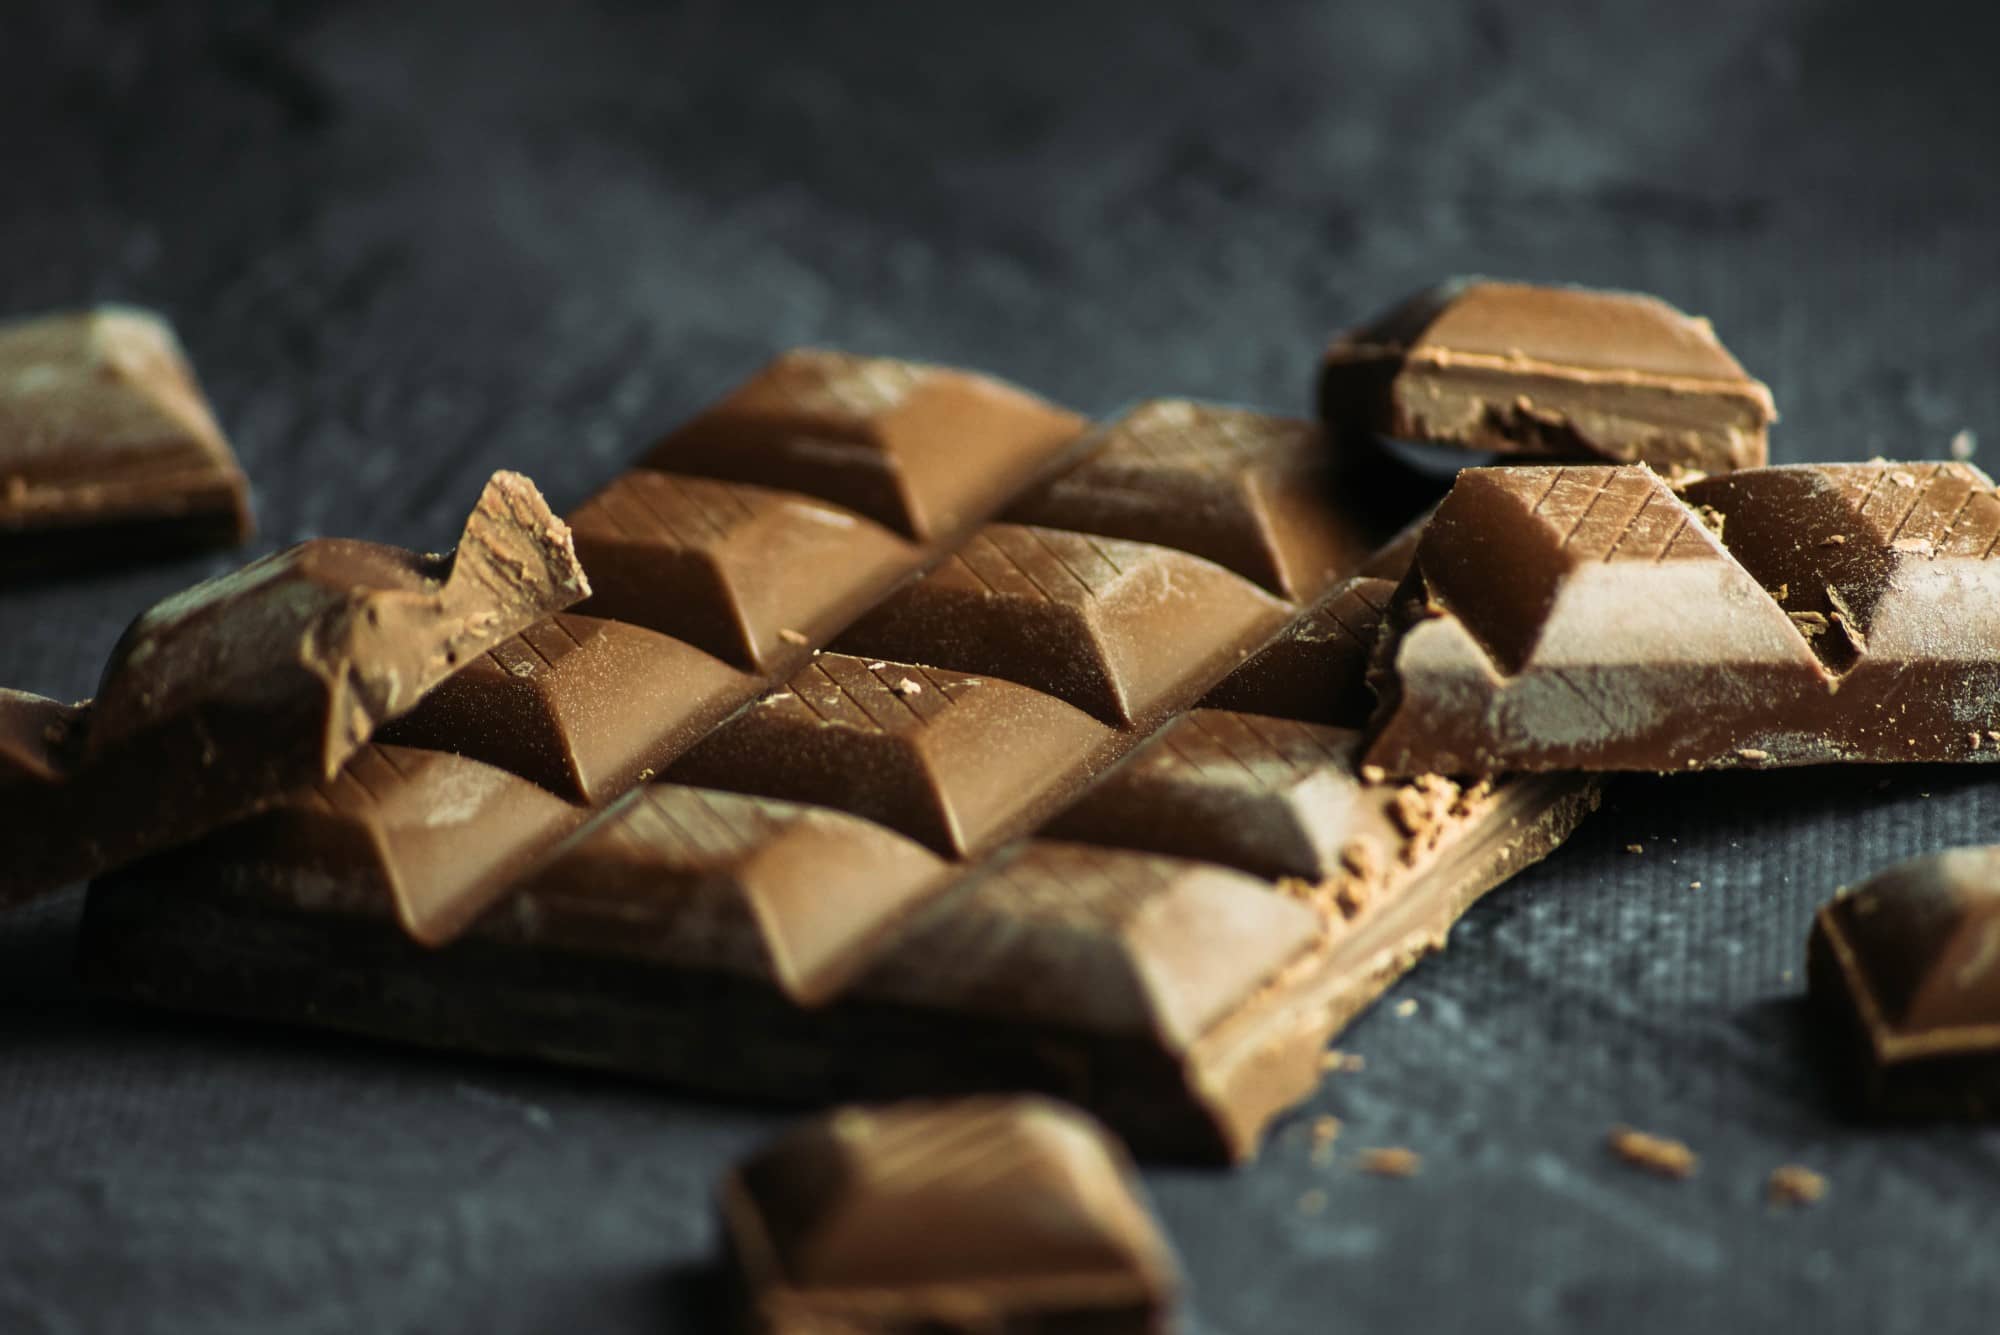 Whisky and chocolate is one of the best scotch and food pairings